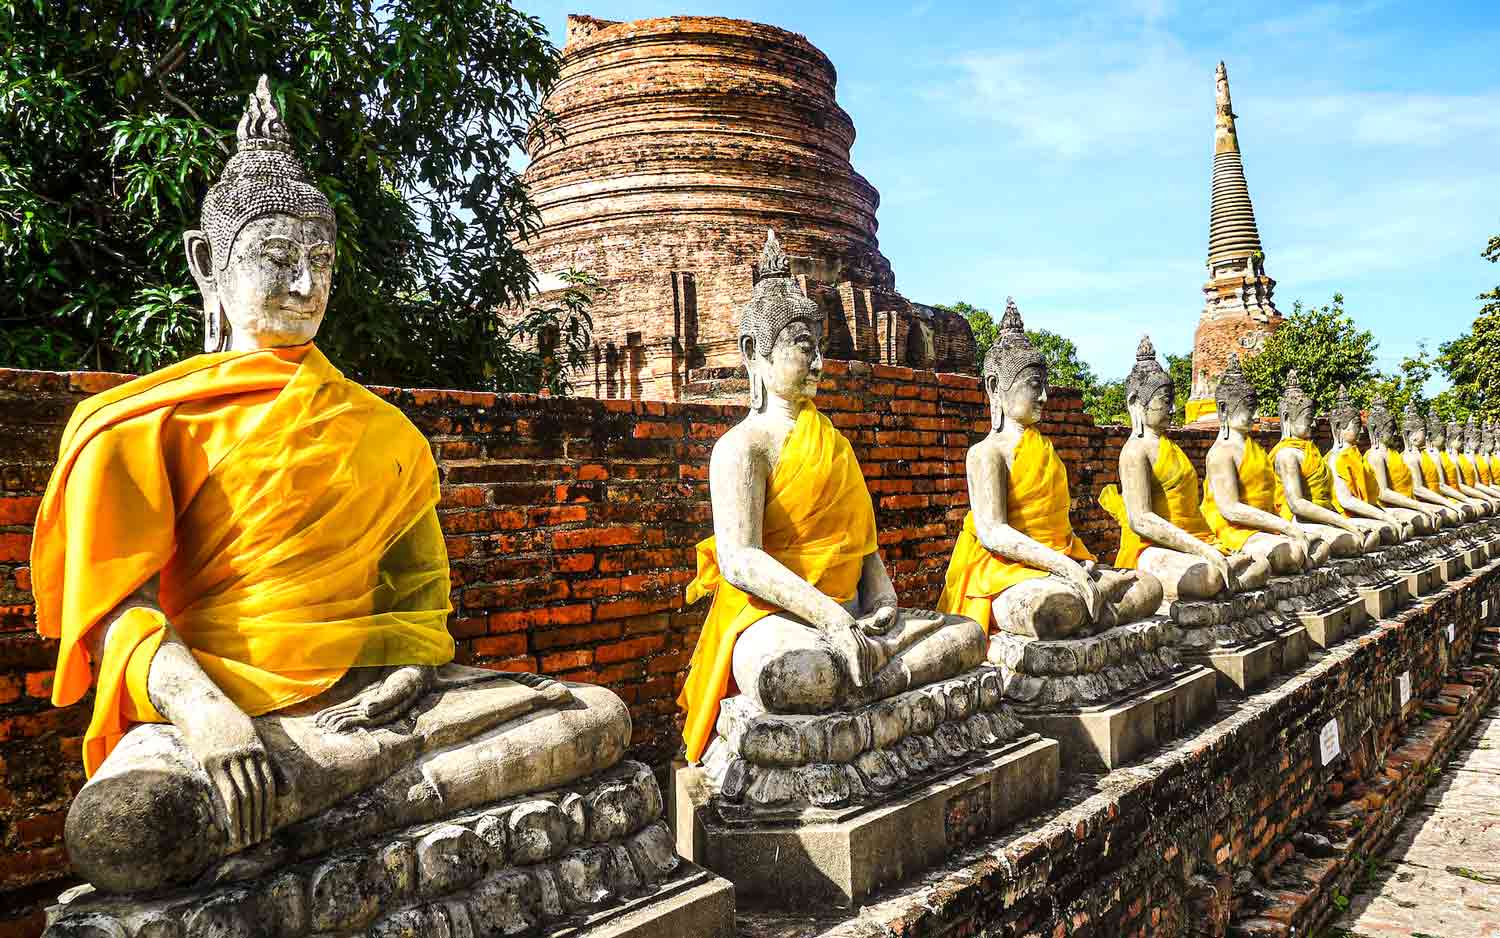 Ancient Buddha statues in Thailand